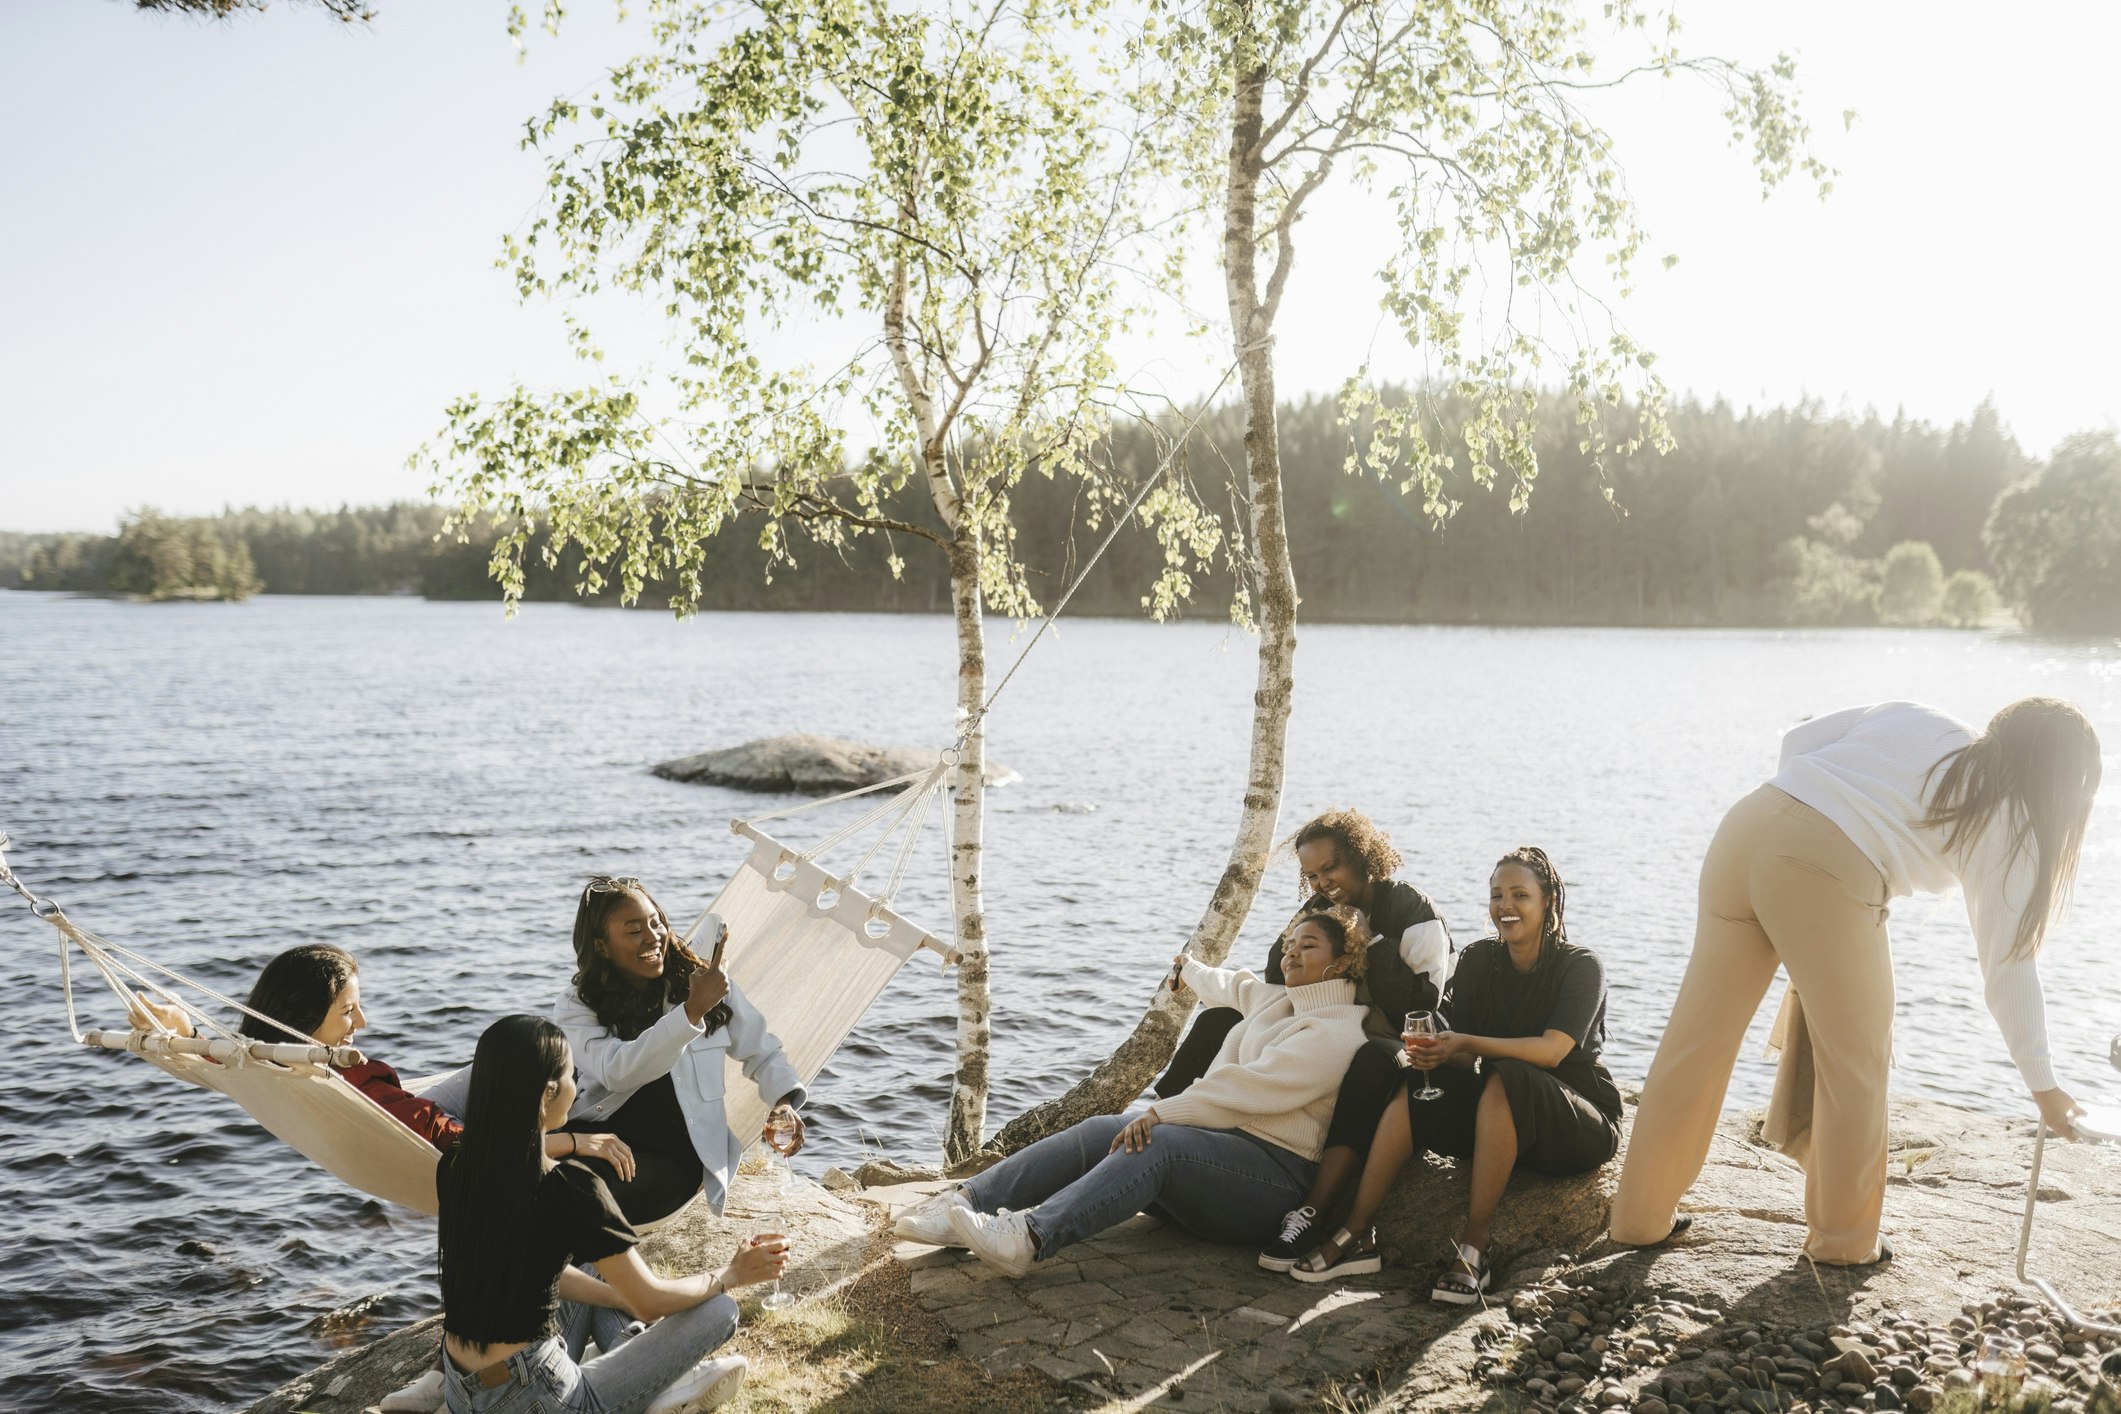 Happy female friends enjoying the lakeshore in Sweden on a sunny day